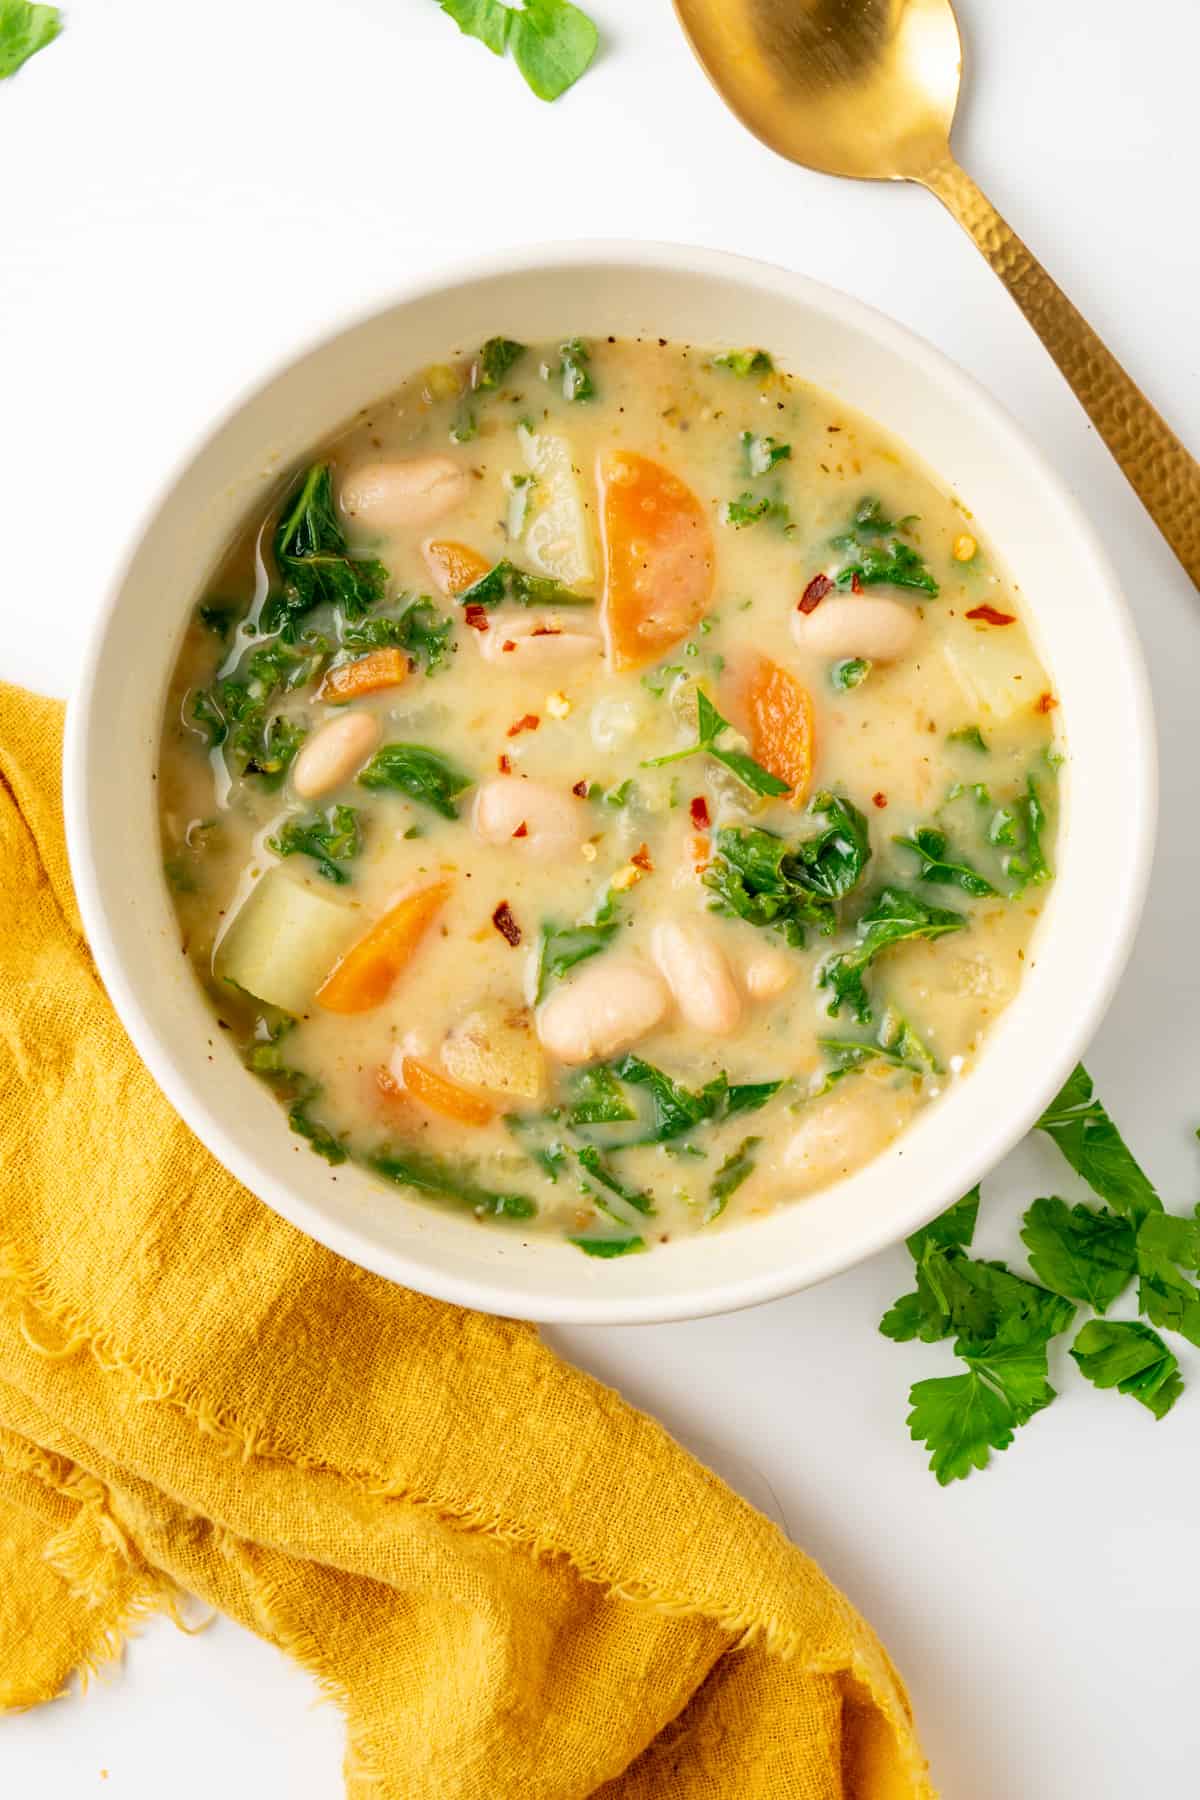 A bowl of white bean soup with pieces of kale, carrot and potato and chili flakes as a garnish.